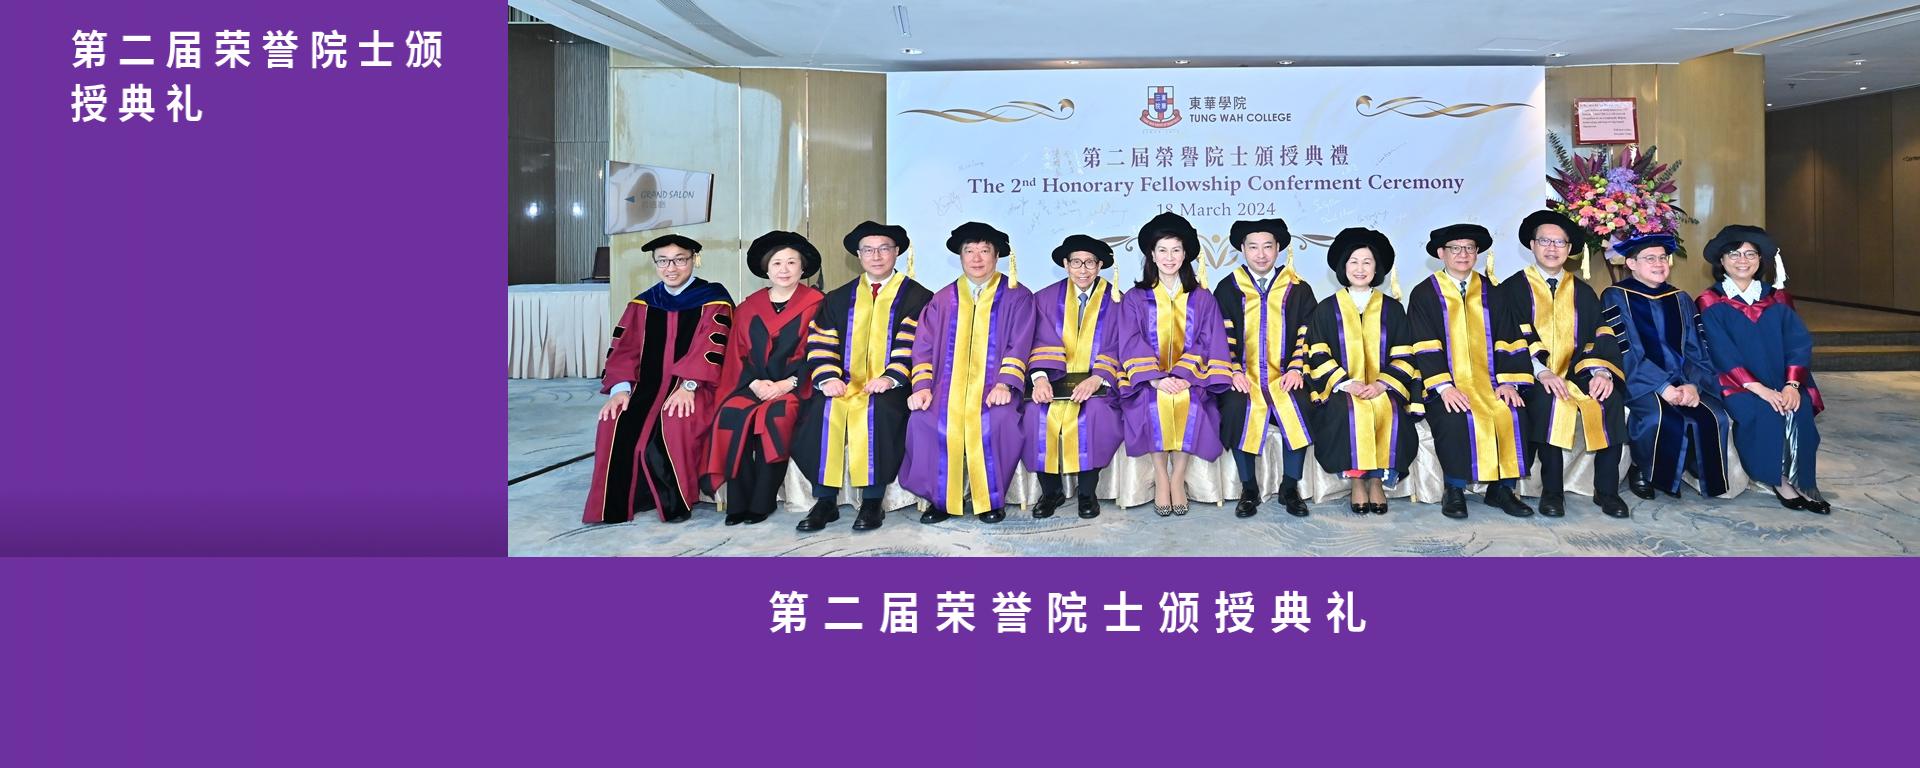 The Second Honorary Fellowship Conferment Ceremony